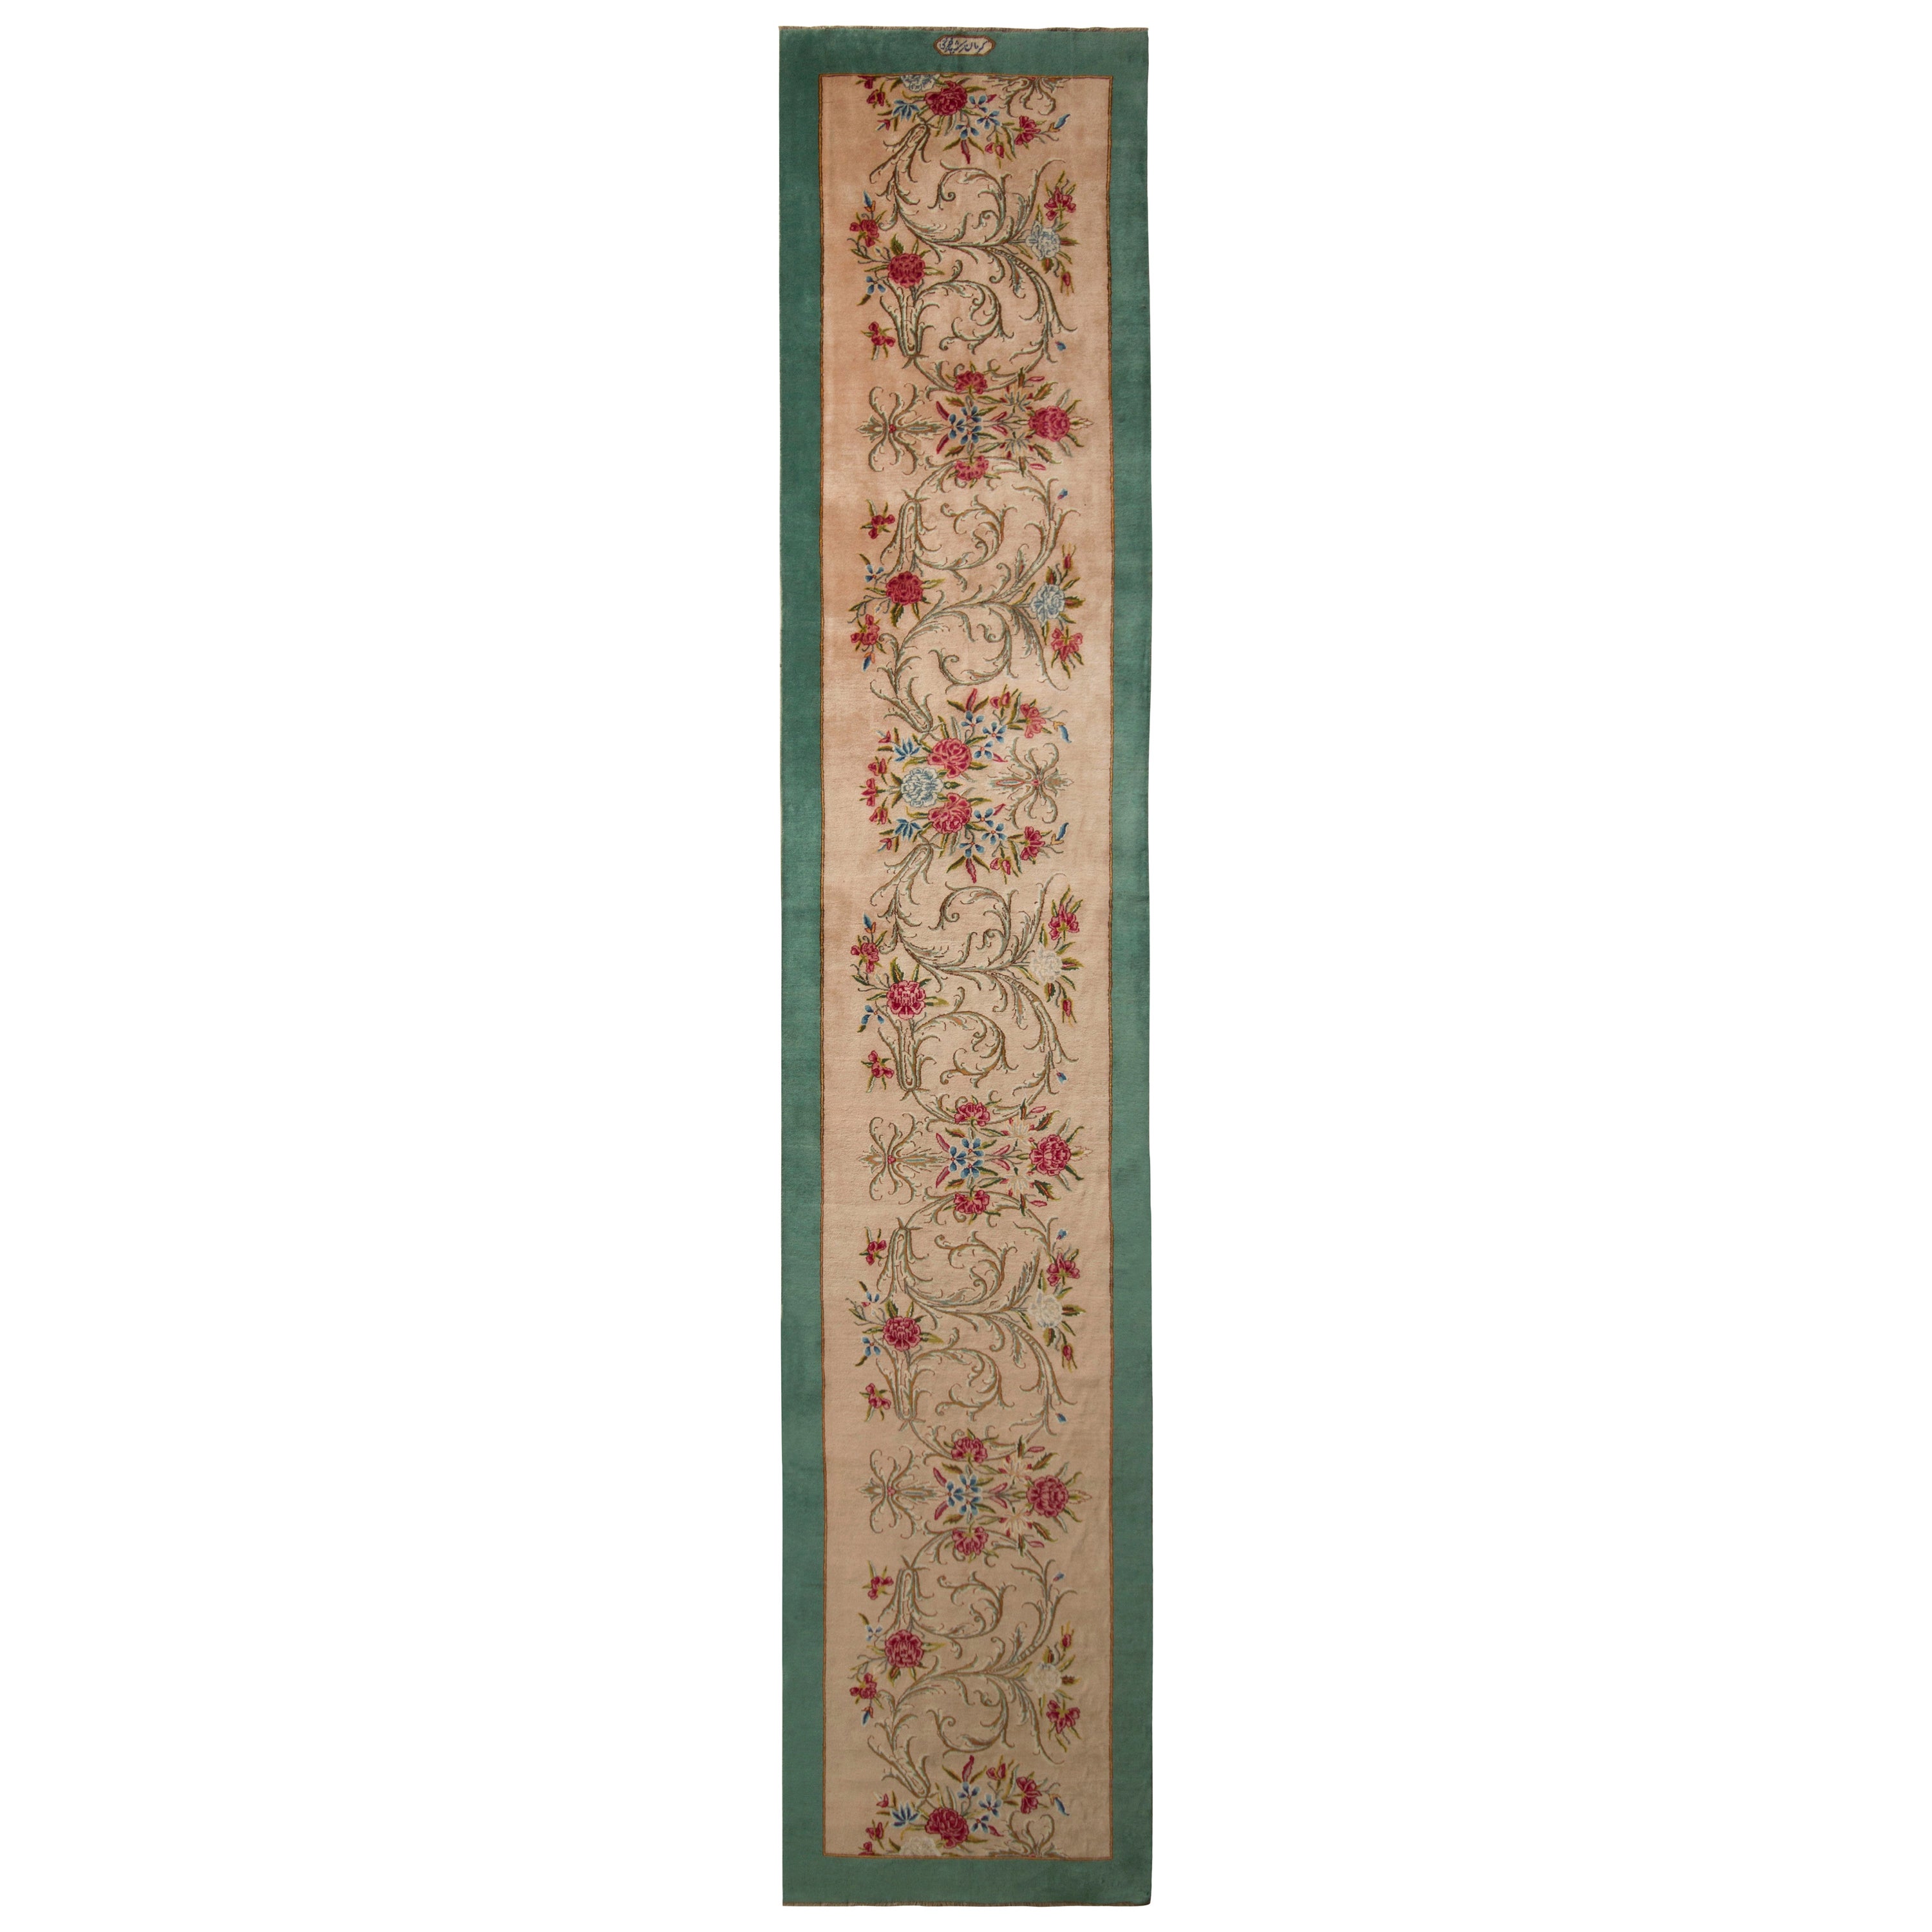 Vintage Signature Twin Persian Runners in Beige with Red & Green Floral Patterns